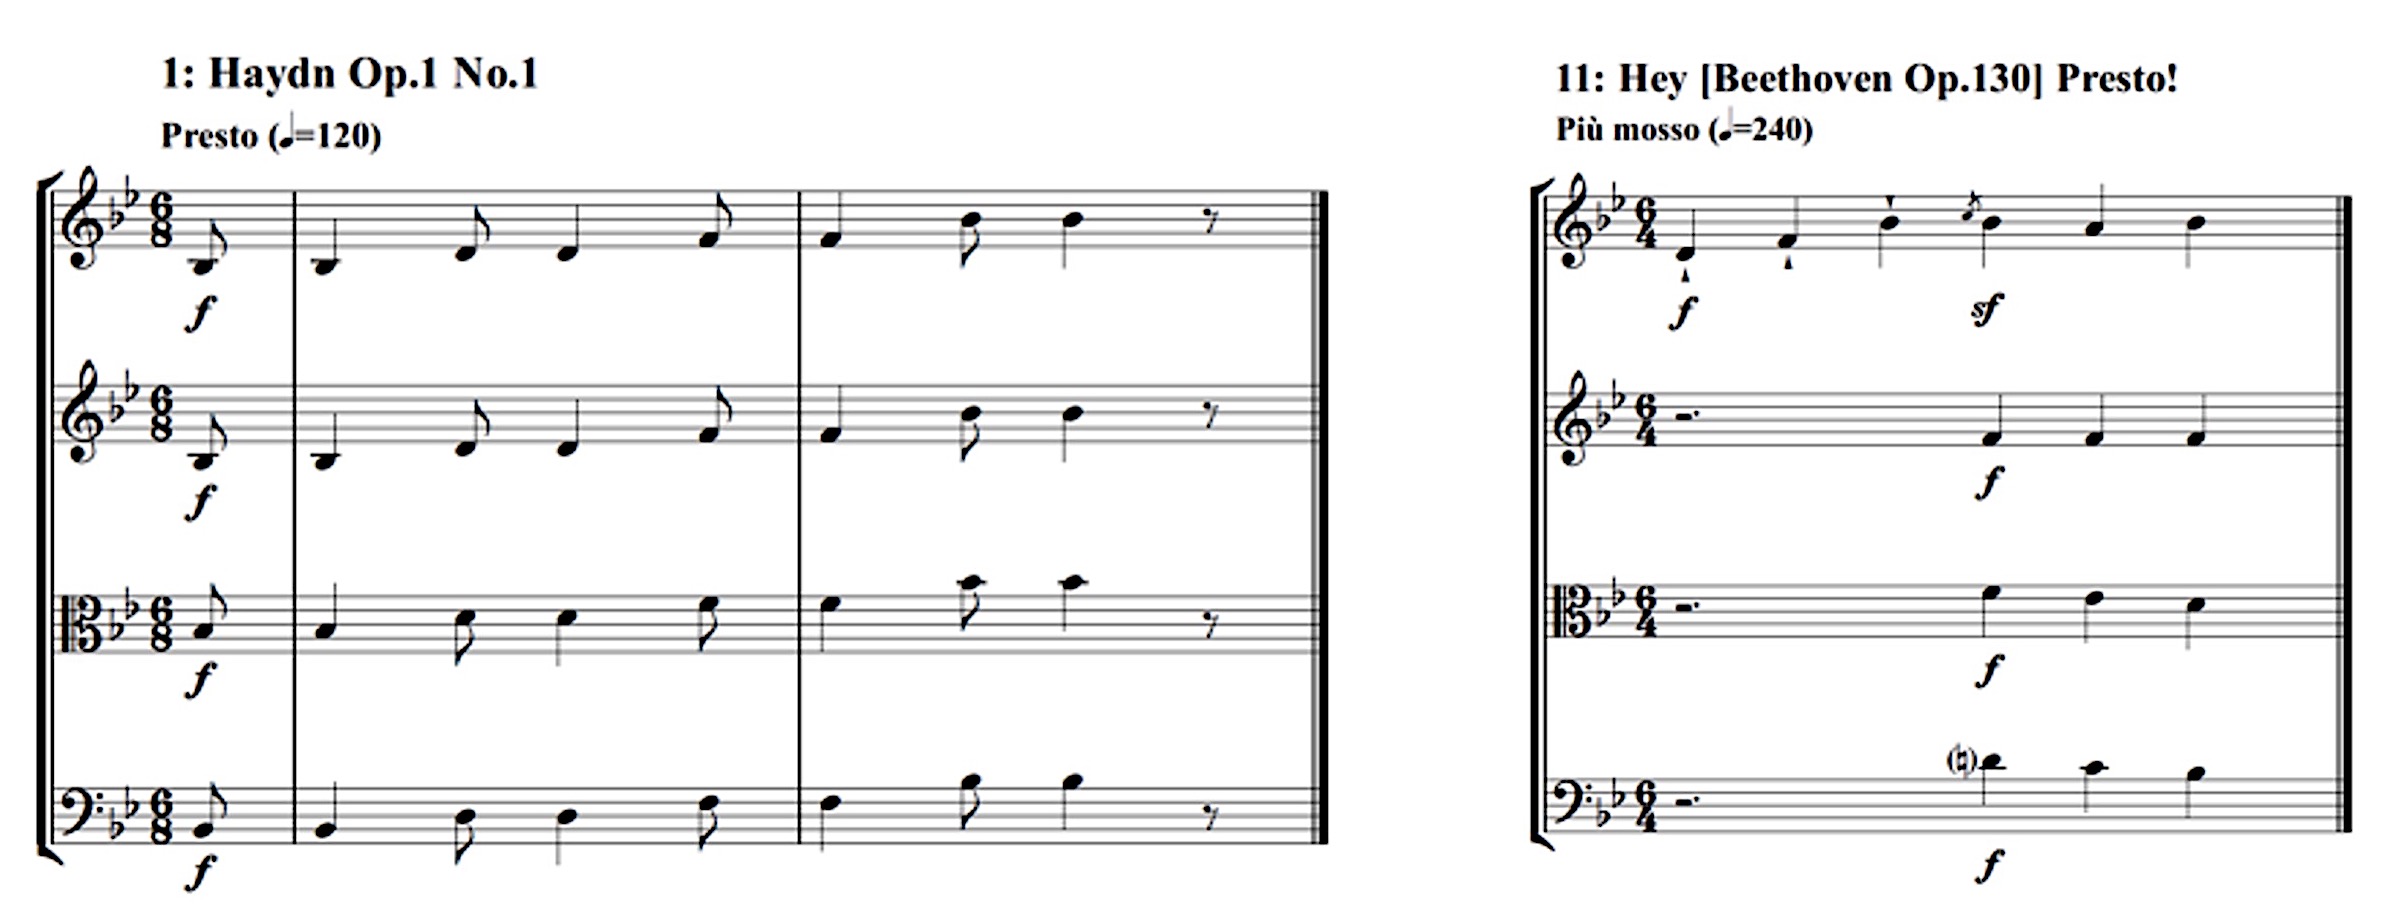 two extracts from a musical score